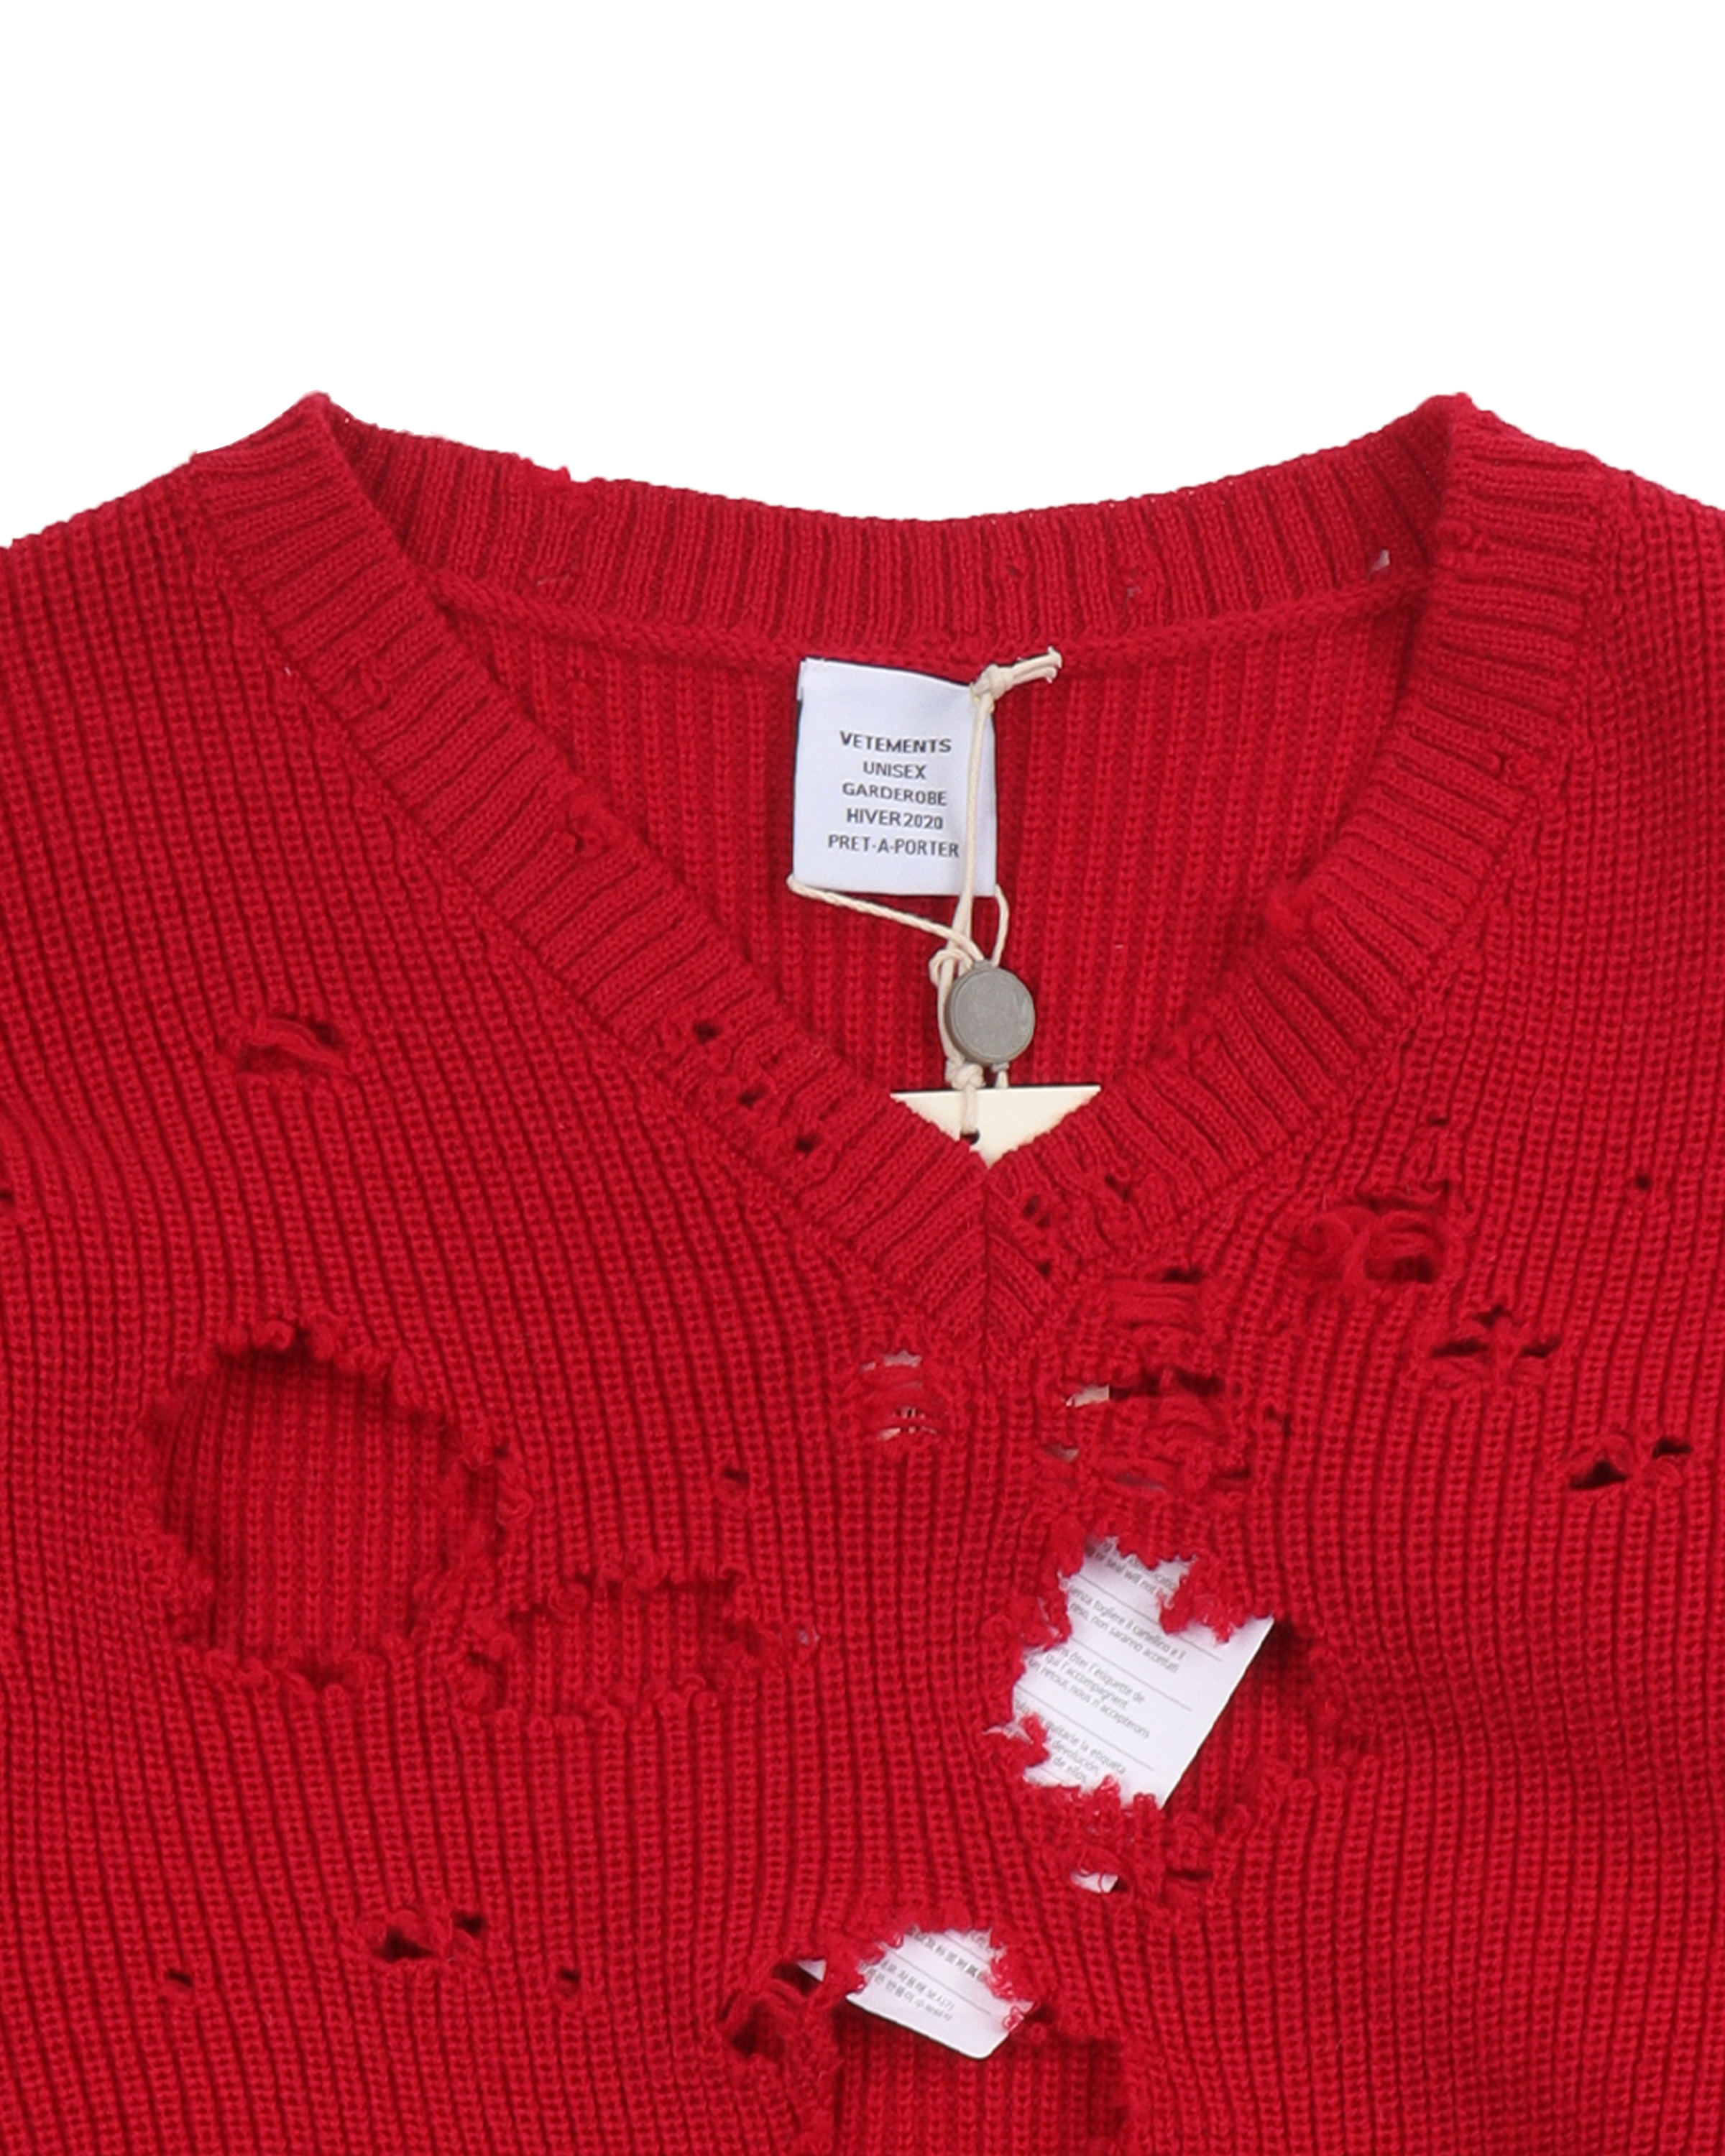 FW20 Distressed Tribute Sweater w/ Tags